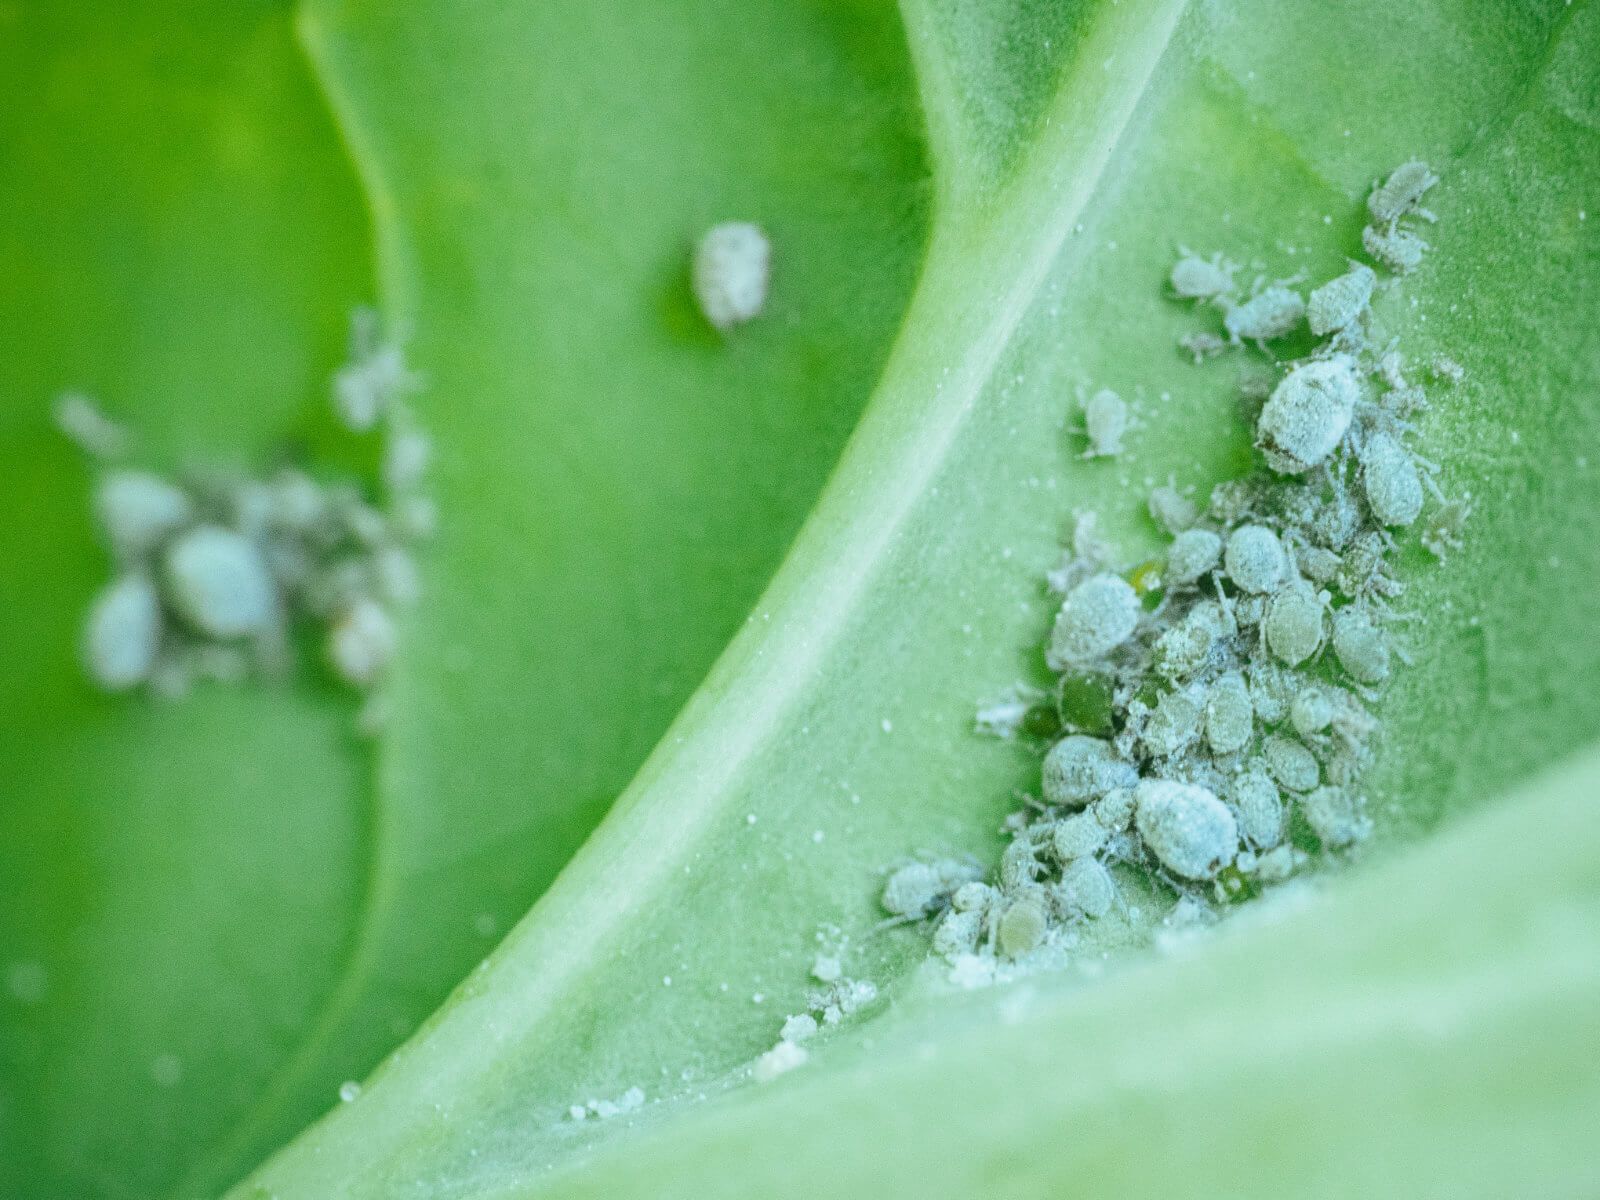 Aphids like to hide on the undersides of leaves